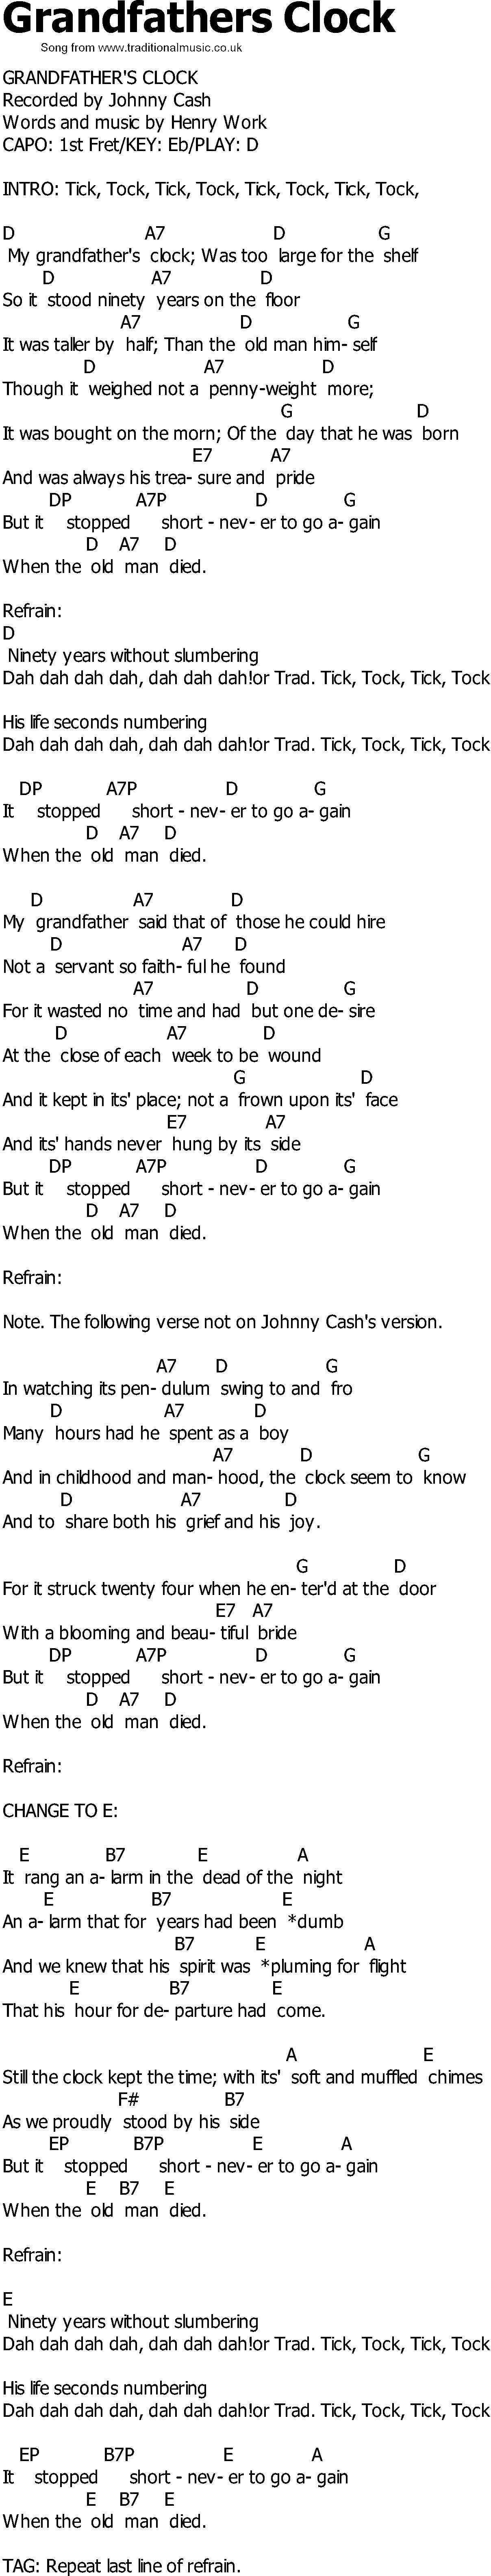 Old Country song lyrics with chords - Grandfathers Clock